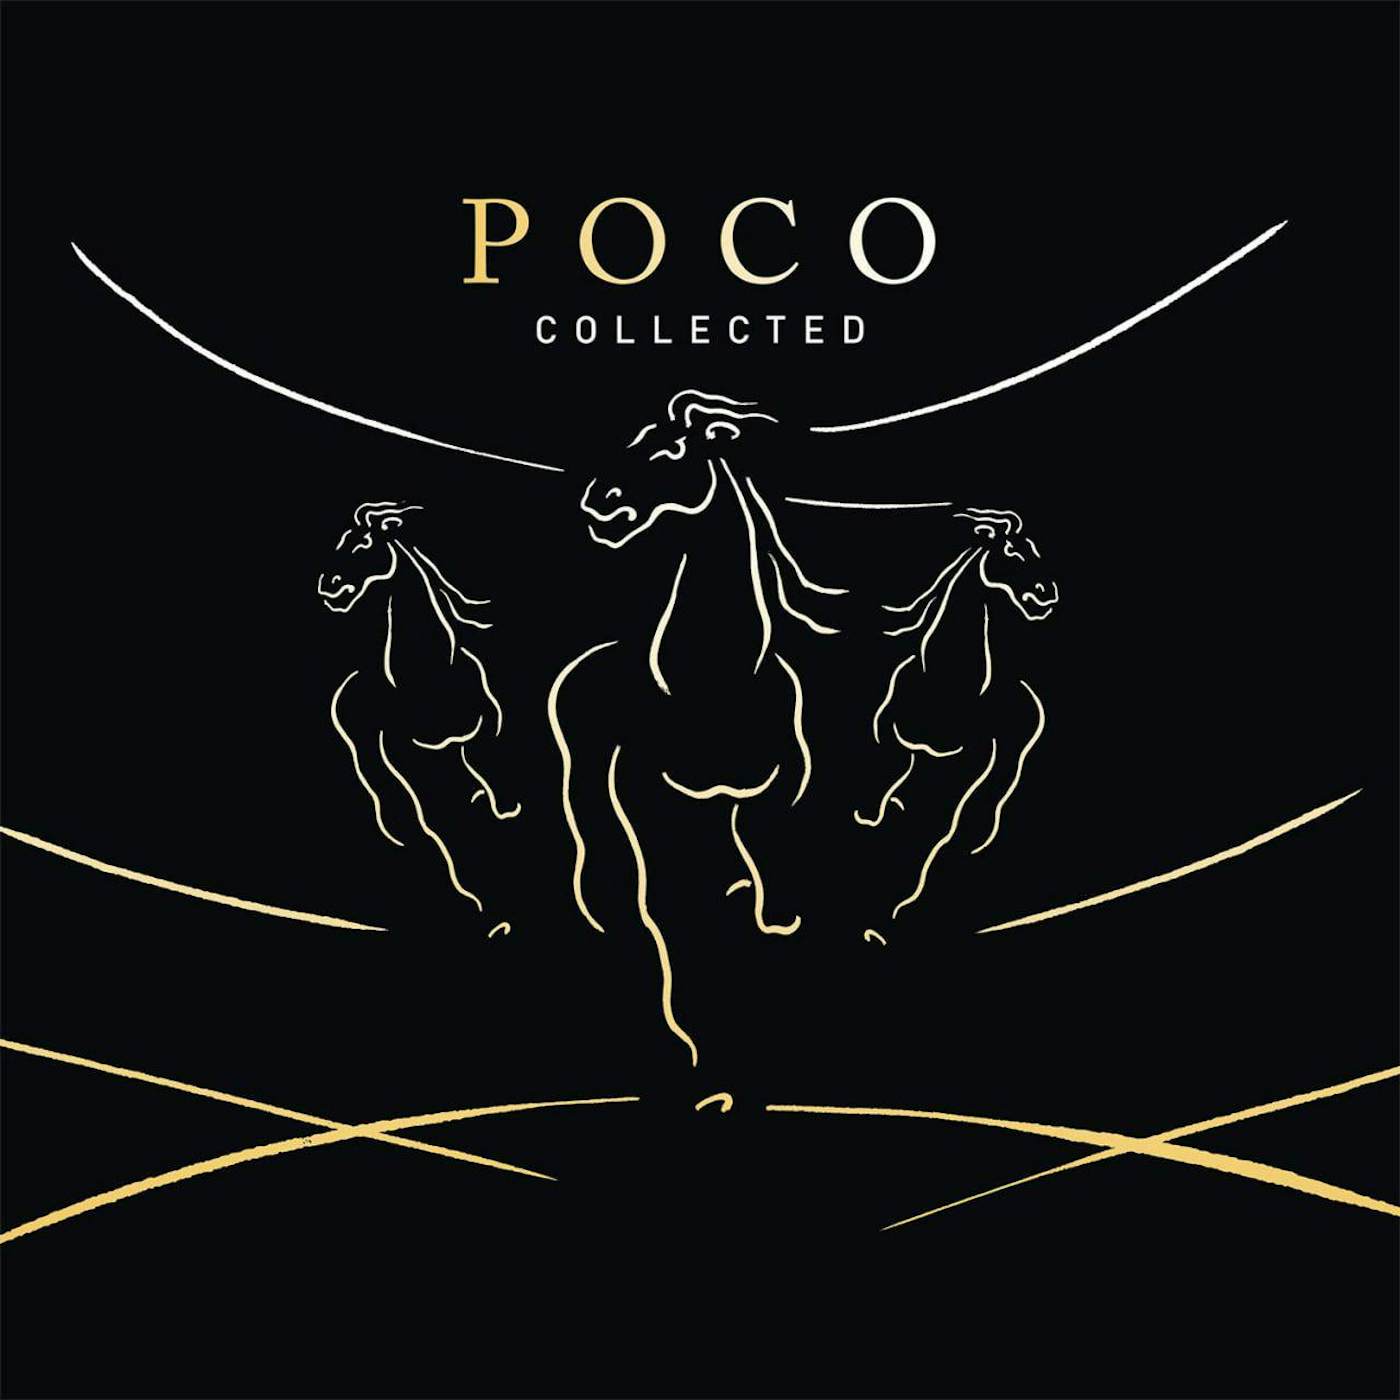 Poco Collected (2LP/Limited/Gold/180g/Gatefold/PVC Sleeve) Vinyl Record